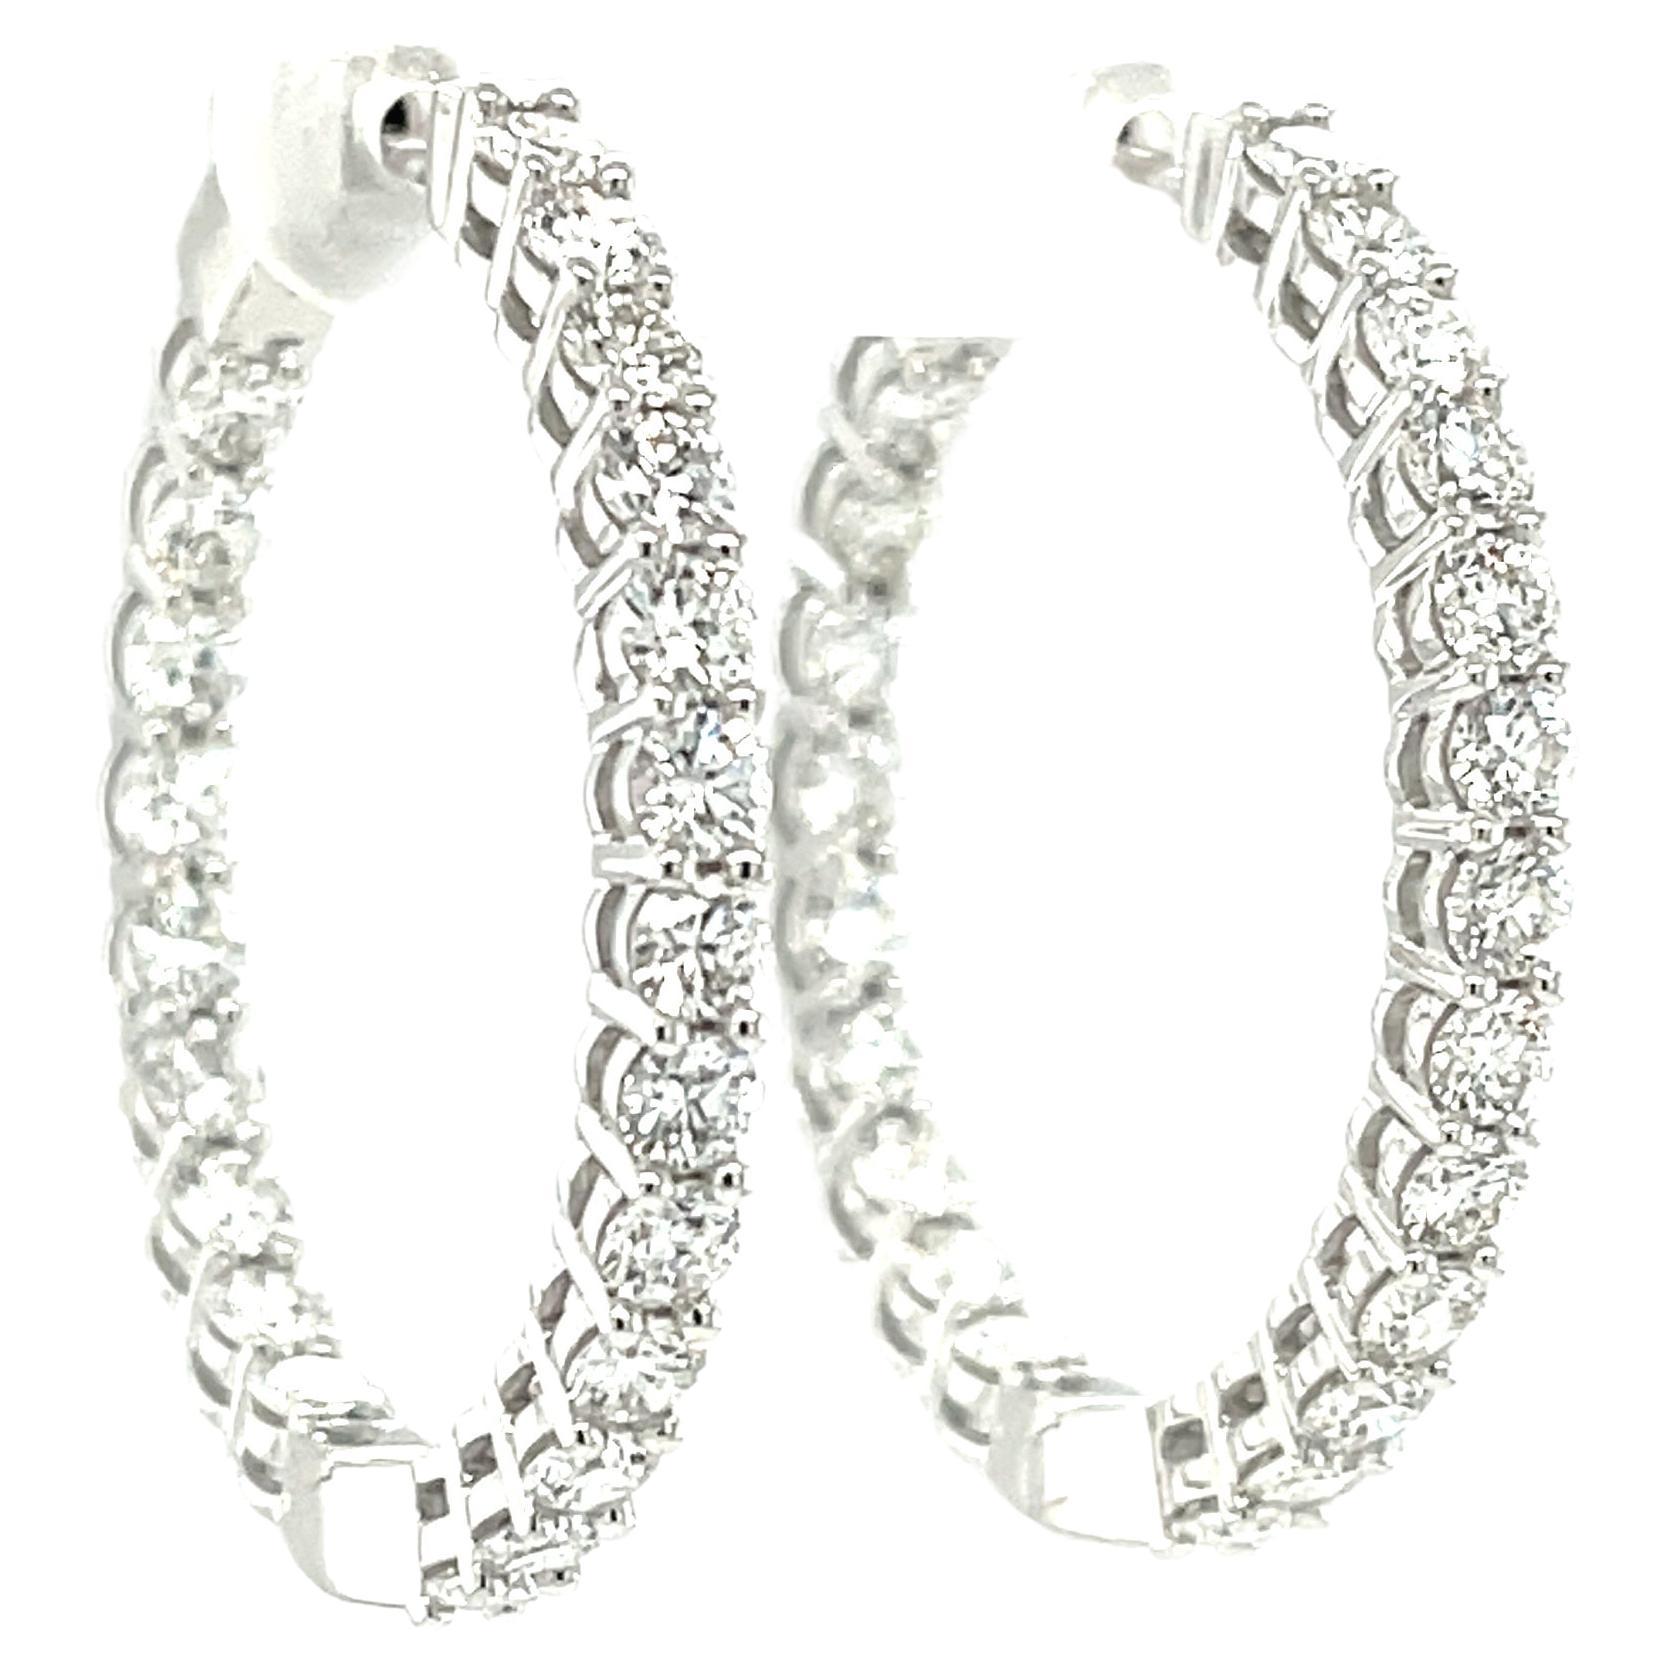 These spectacular diamond hoops are a classic that will never go out of style! With the 